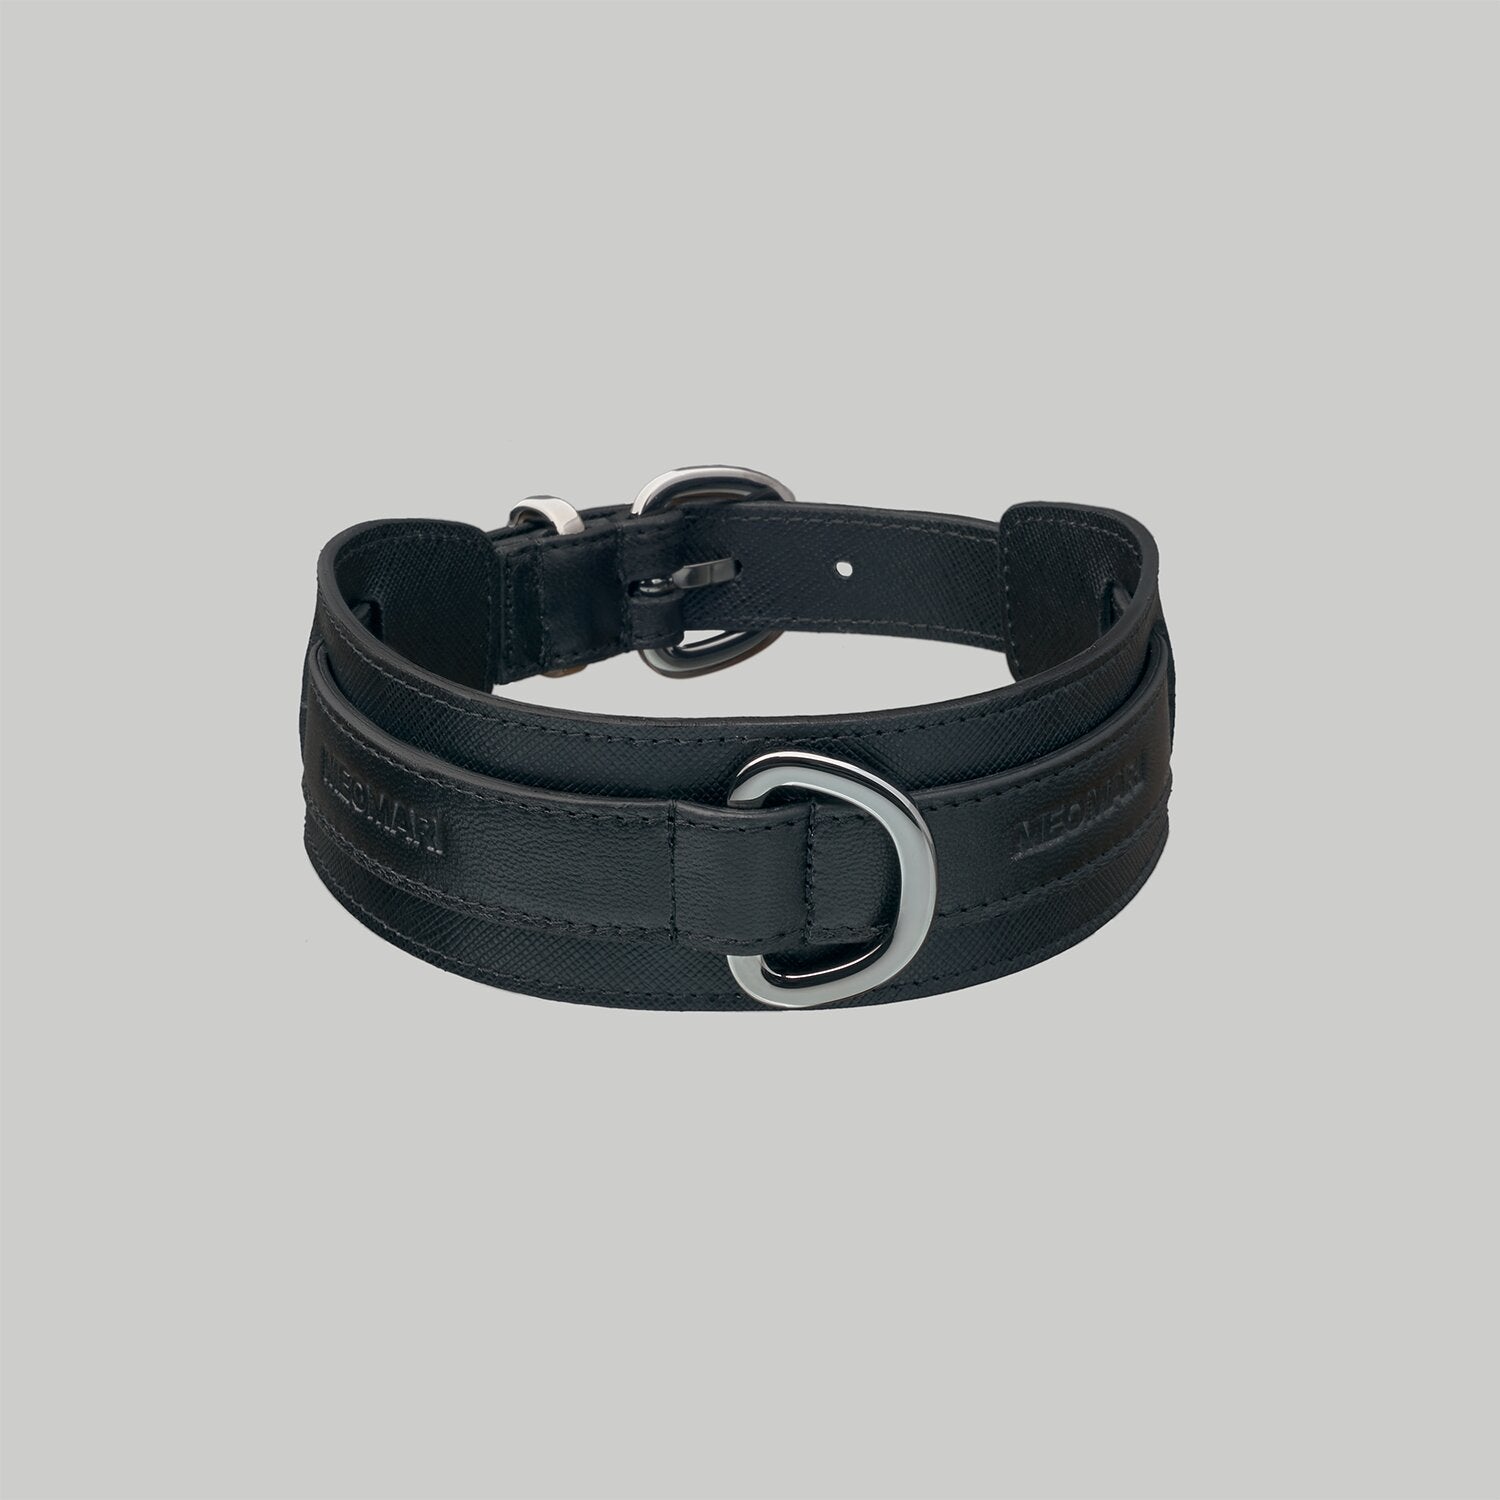 Luxury dog collar in black Saffiano leather with Ruthenium